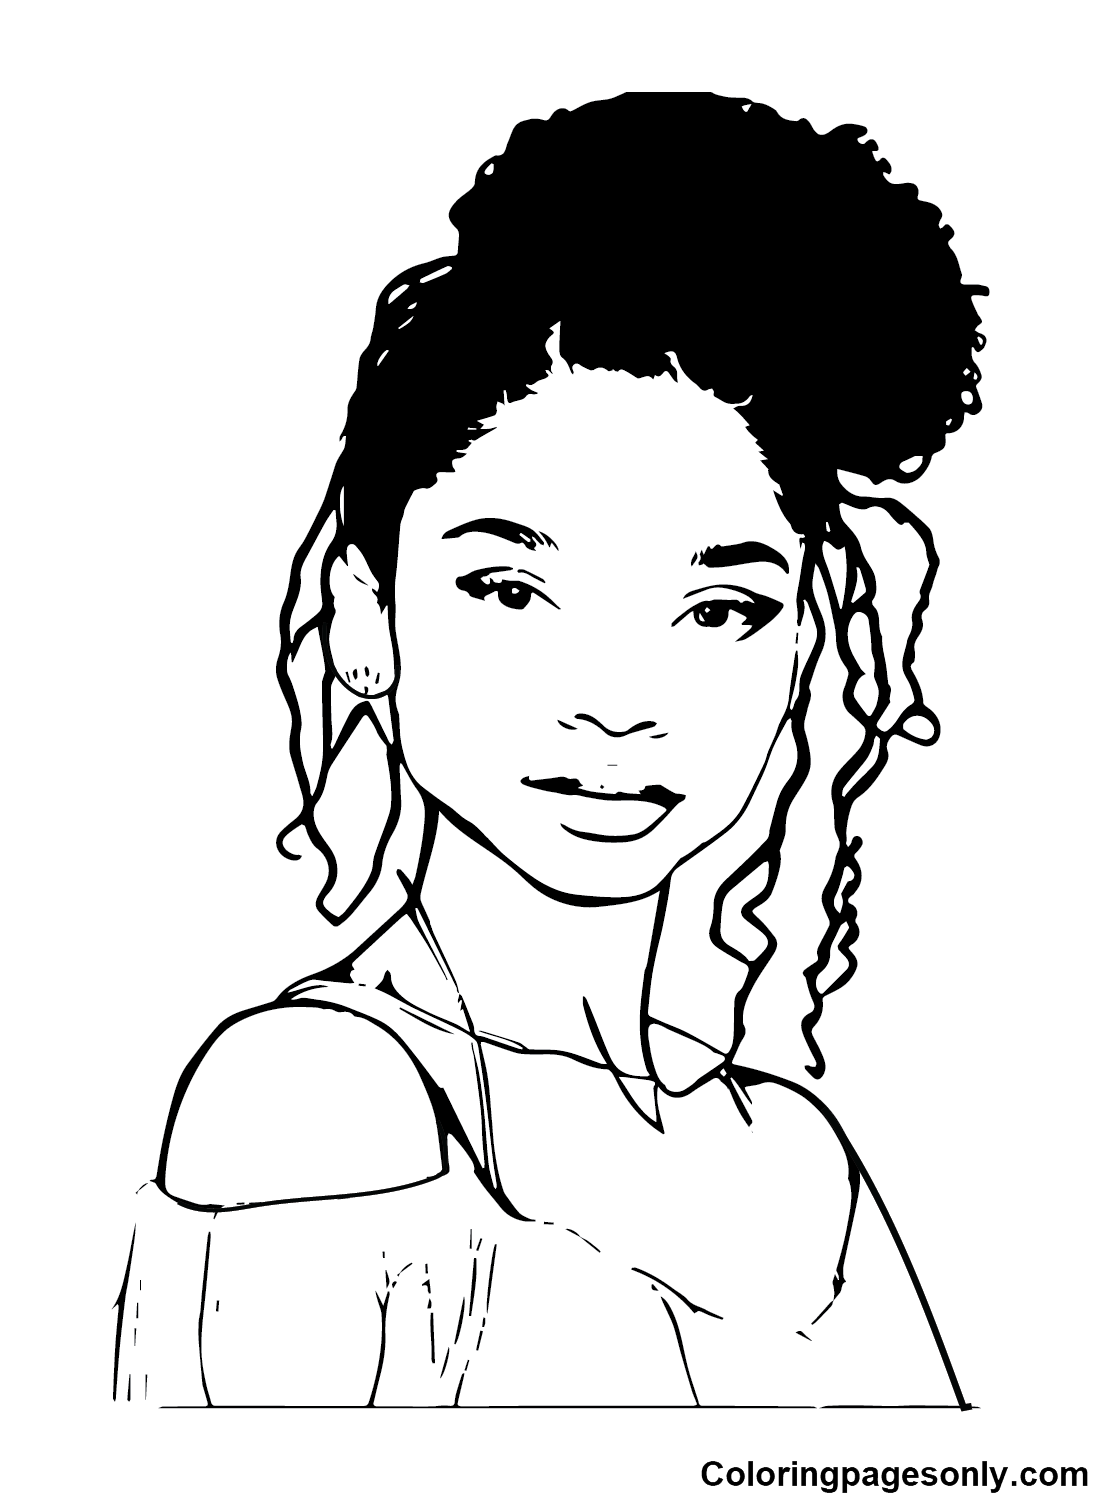 Free Halle Bailey Coloring Page